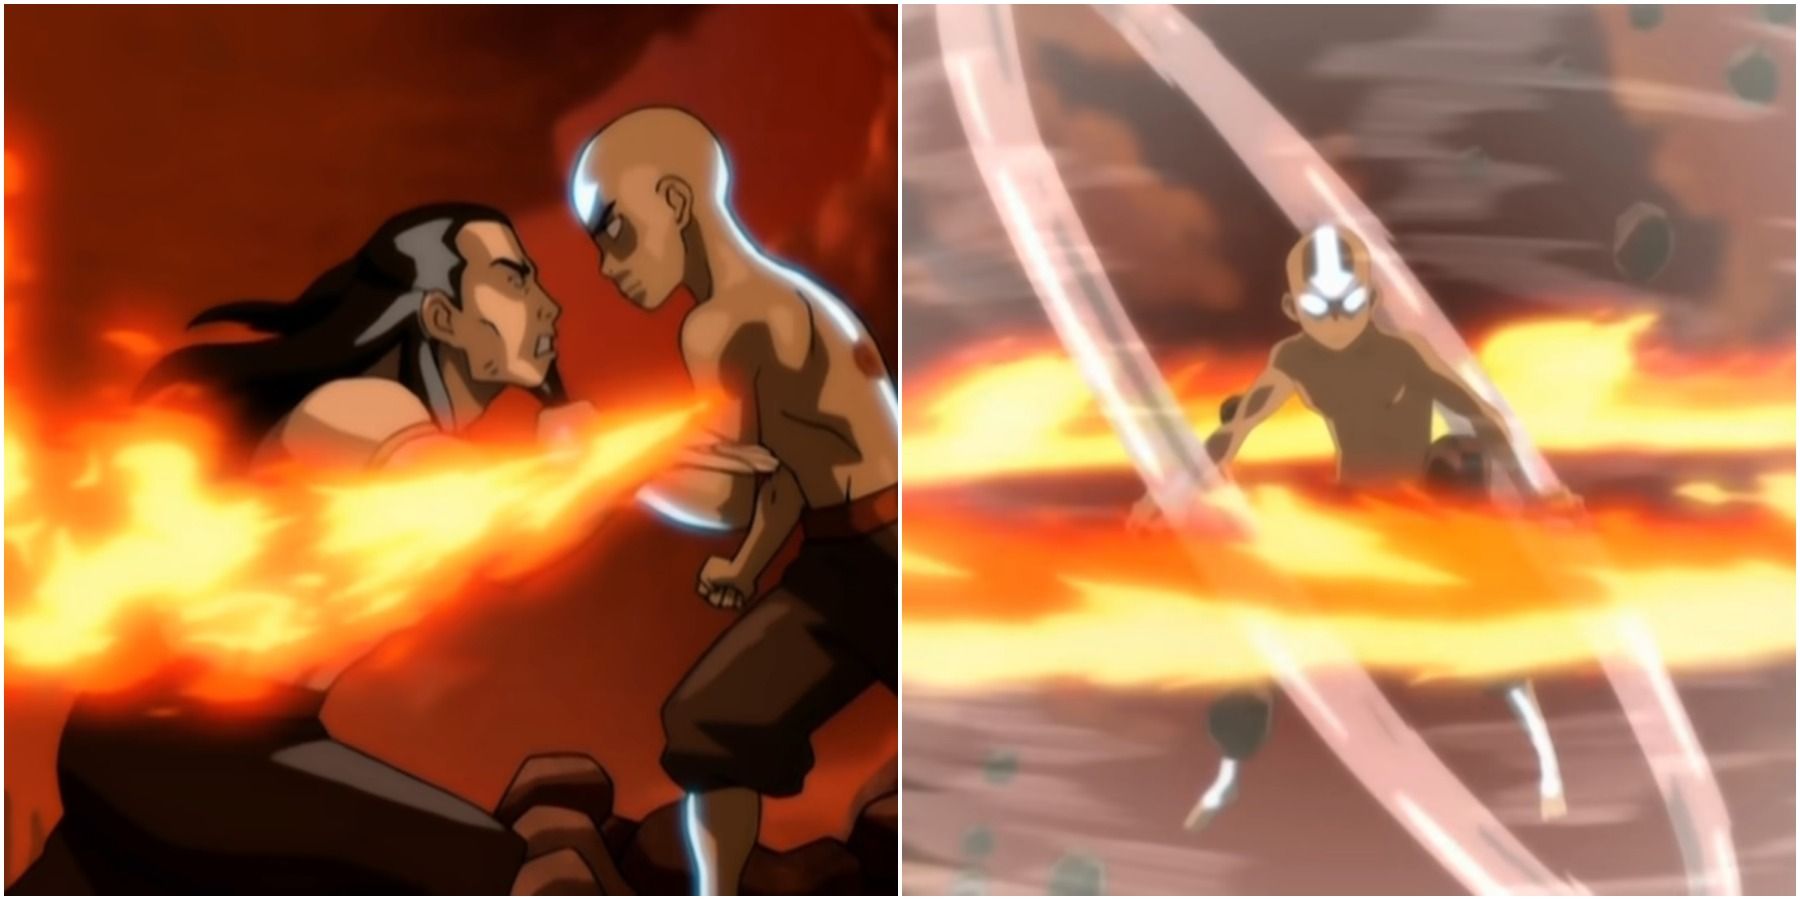 Aang In The Avatar State vs Firelord Ozai in Avatar: The Last Airbender